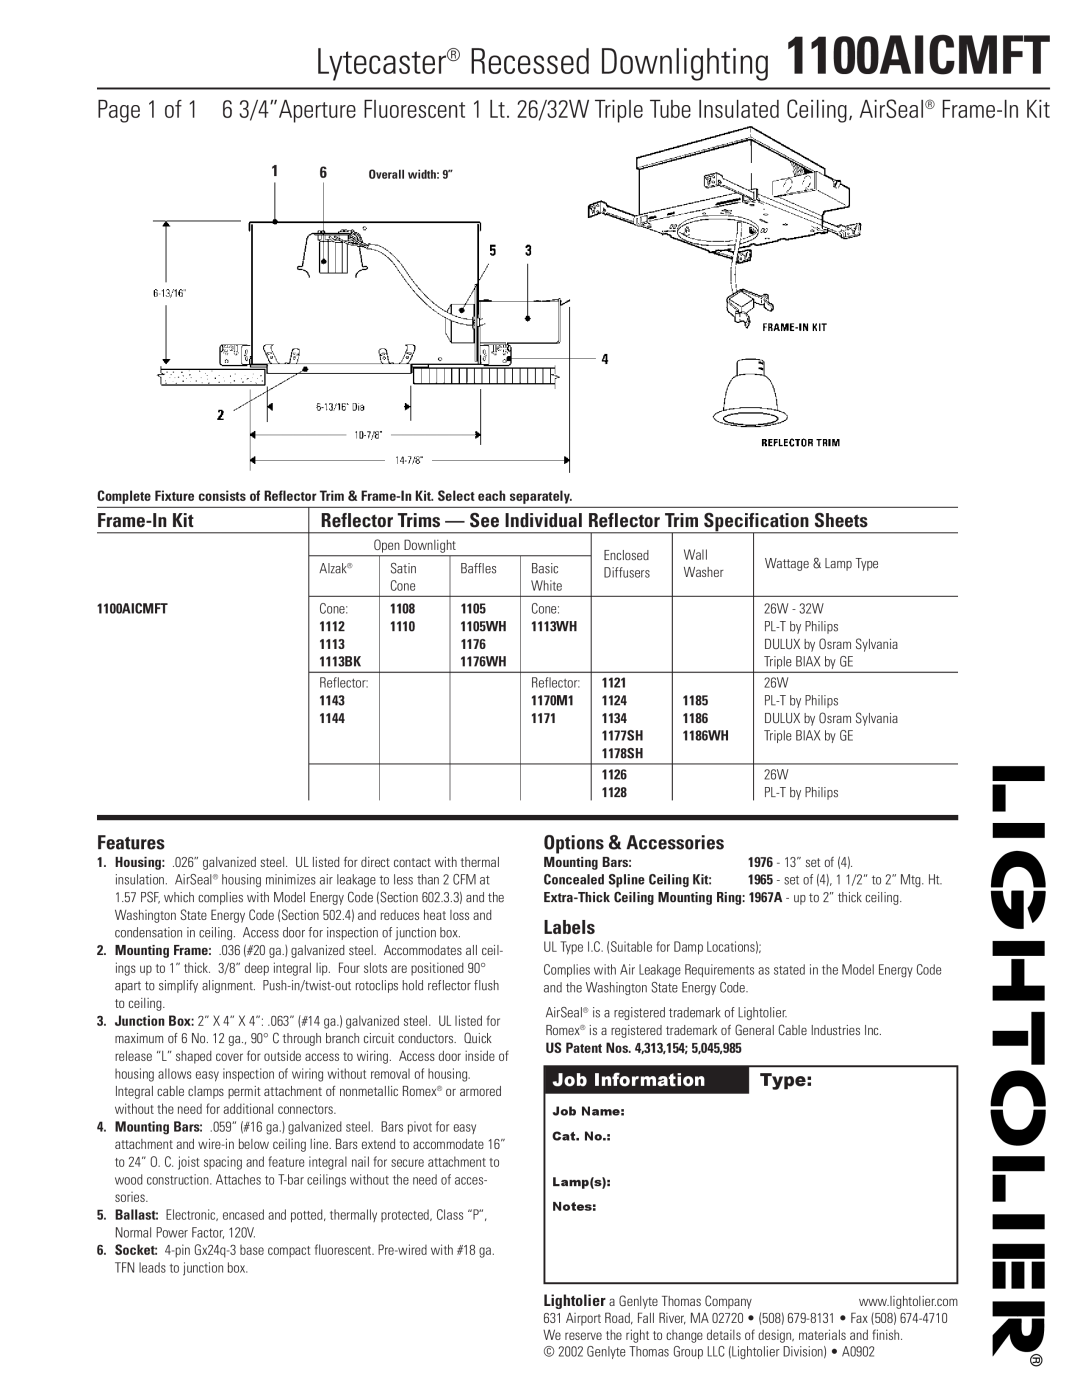 Lightolier specifications Lytecaster Recessed Downlighting 1100AICMFT, Frame-InKit, Features, Options & Accessories 